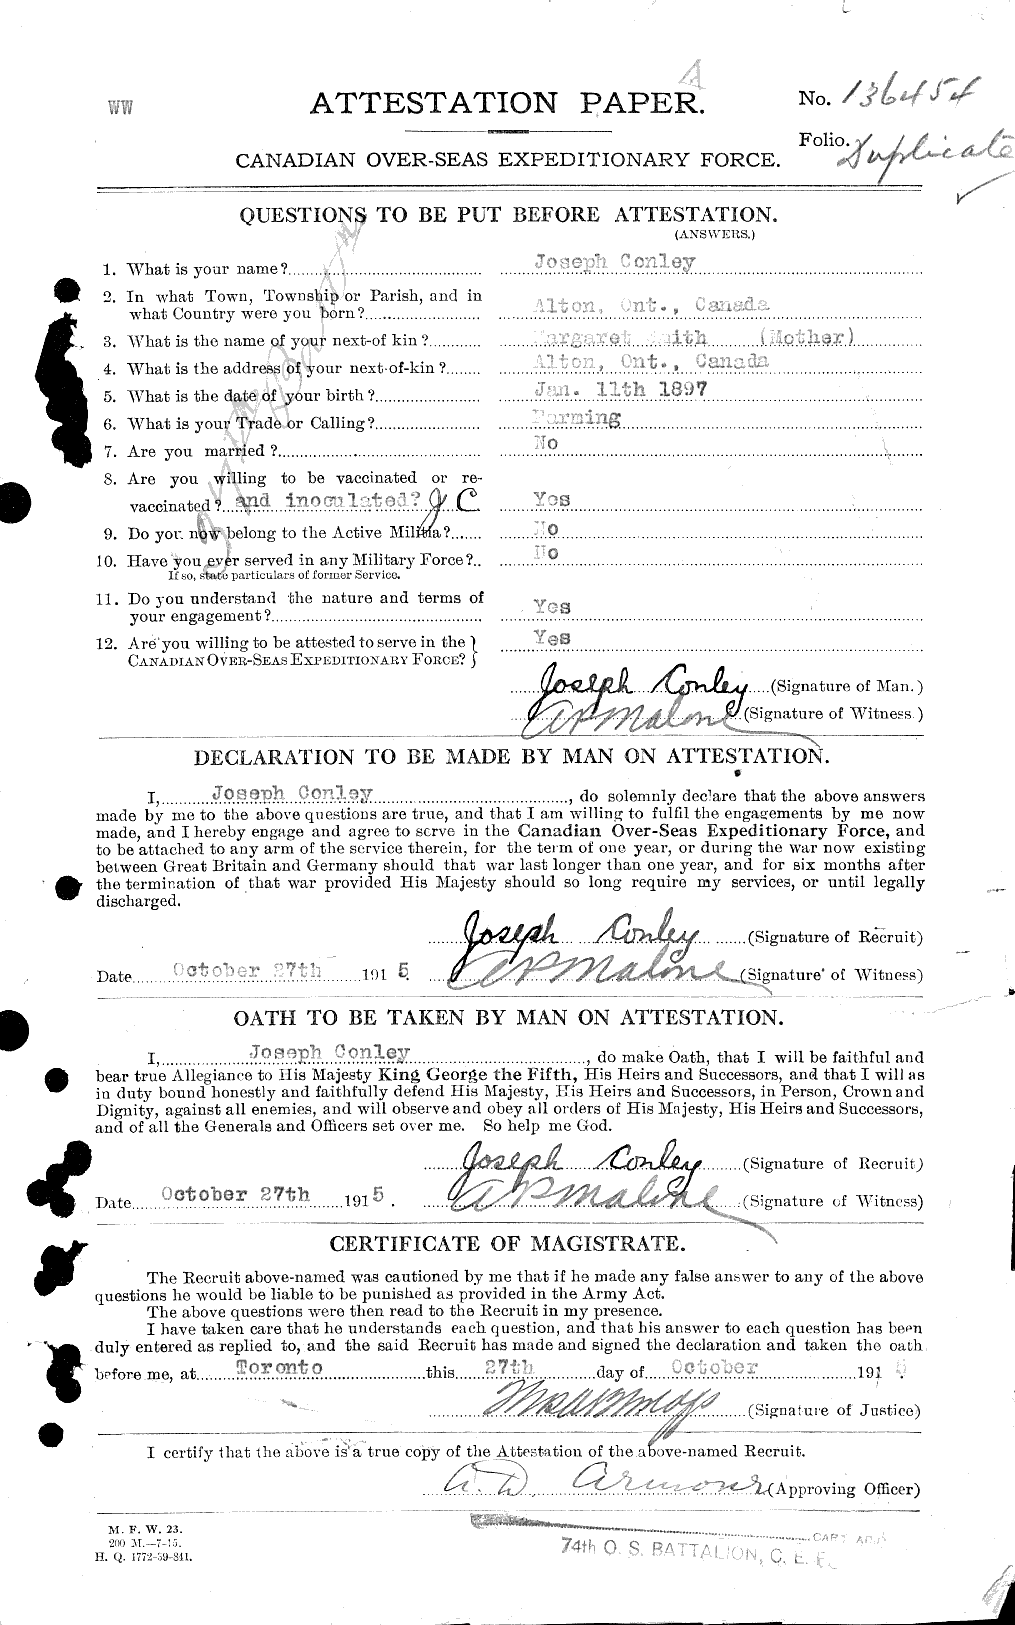 Personnel Records of the First World War - CEF 036010a